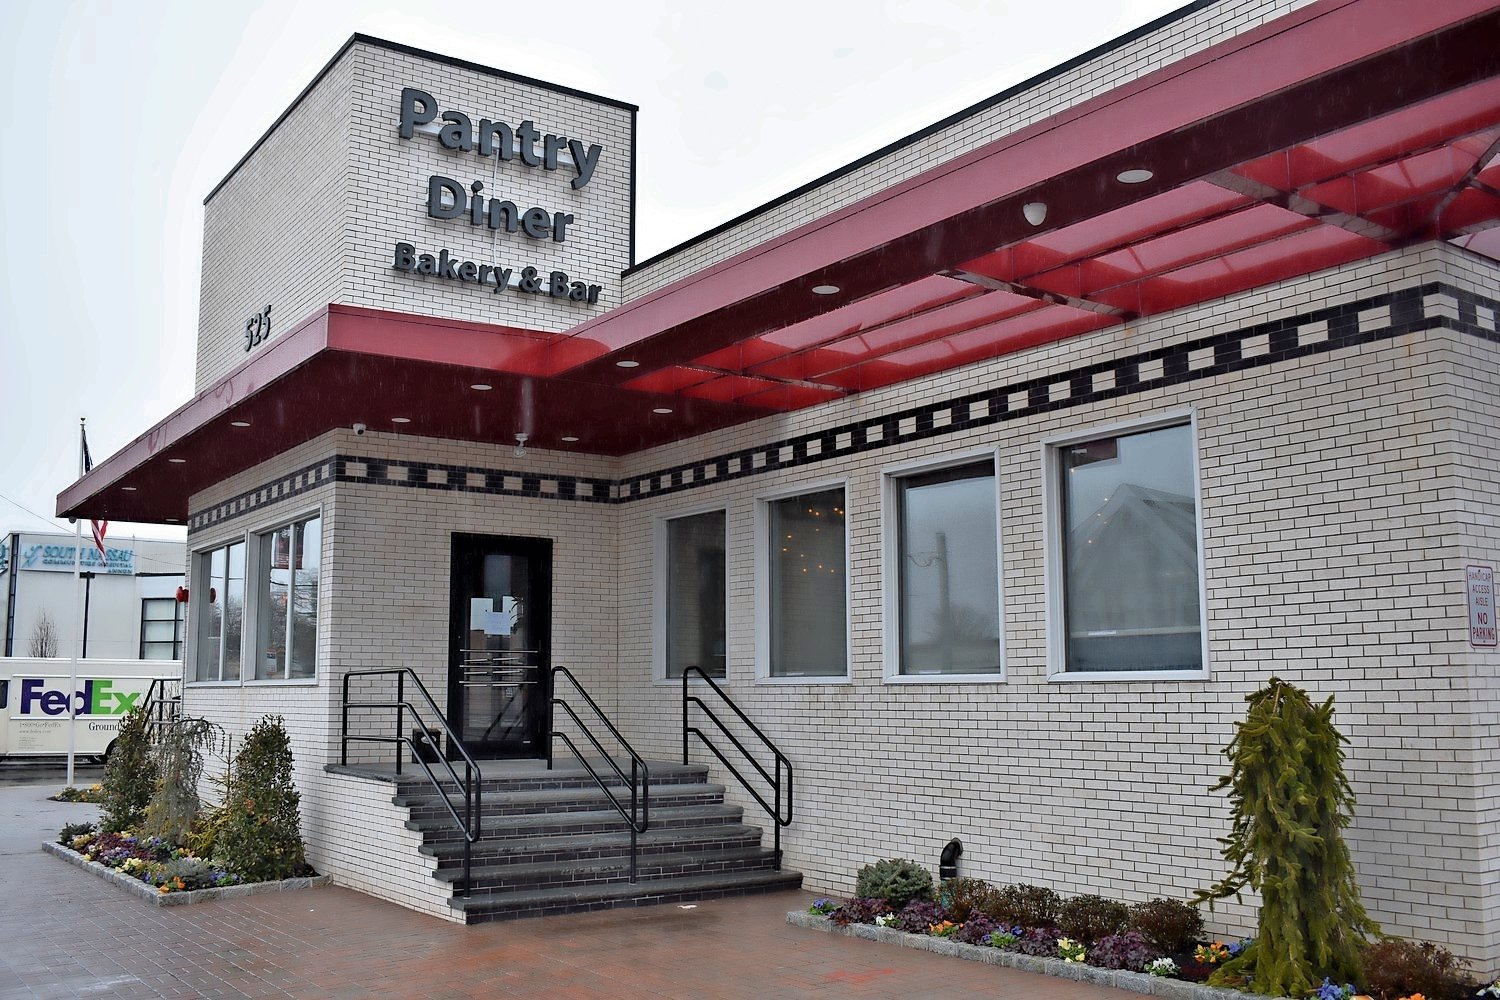 The Pantry Diner is one of many restaurants offering takeout and delivery services while there is a statewide ban on opening to dine-in customers to help prevent the spread of the coronavirus.